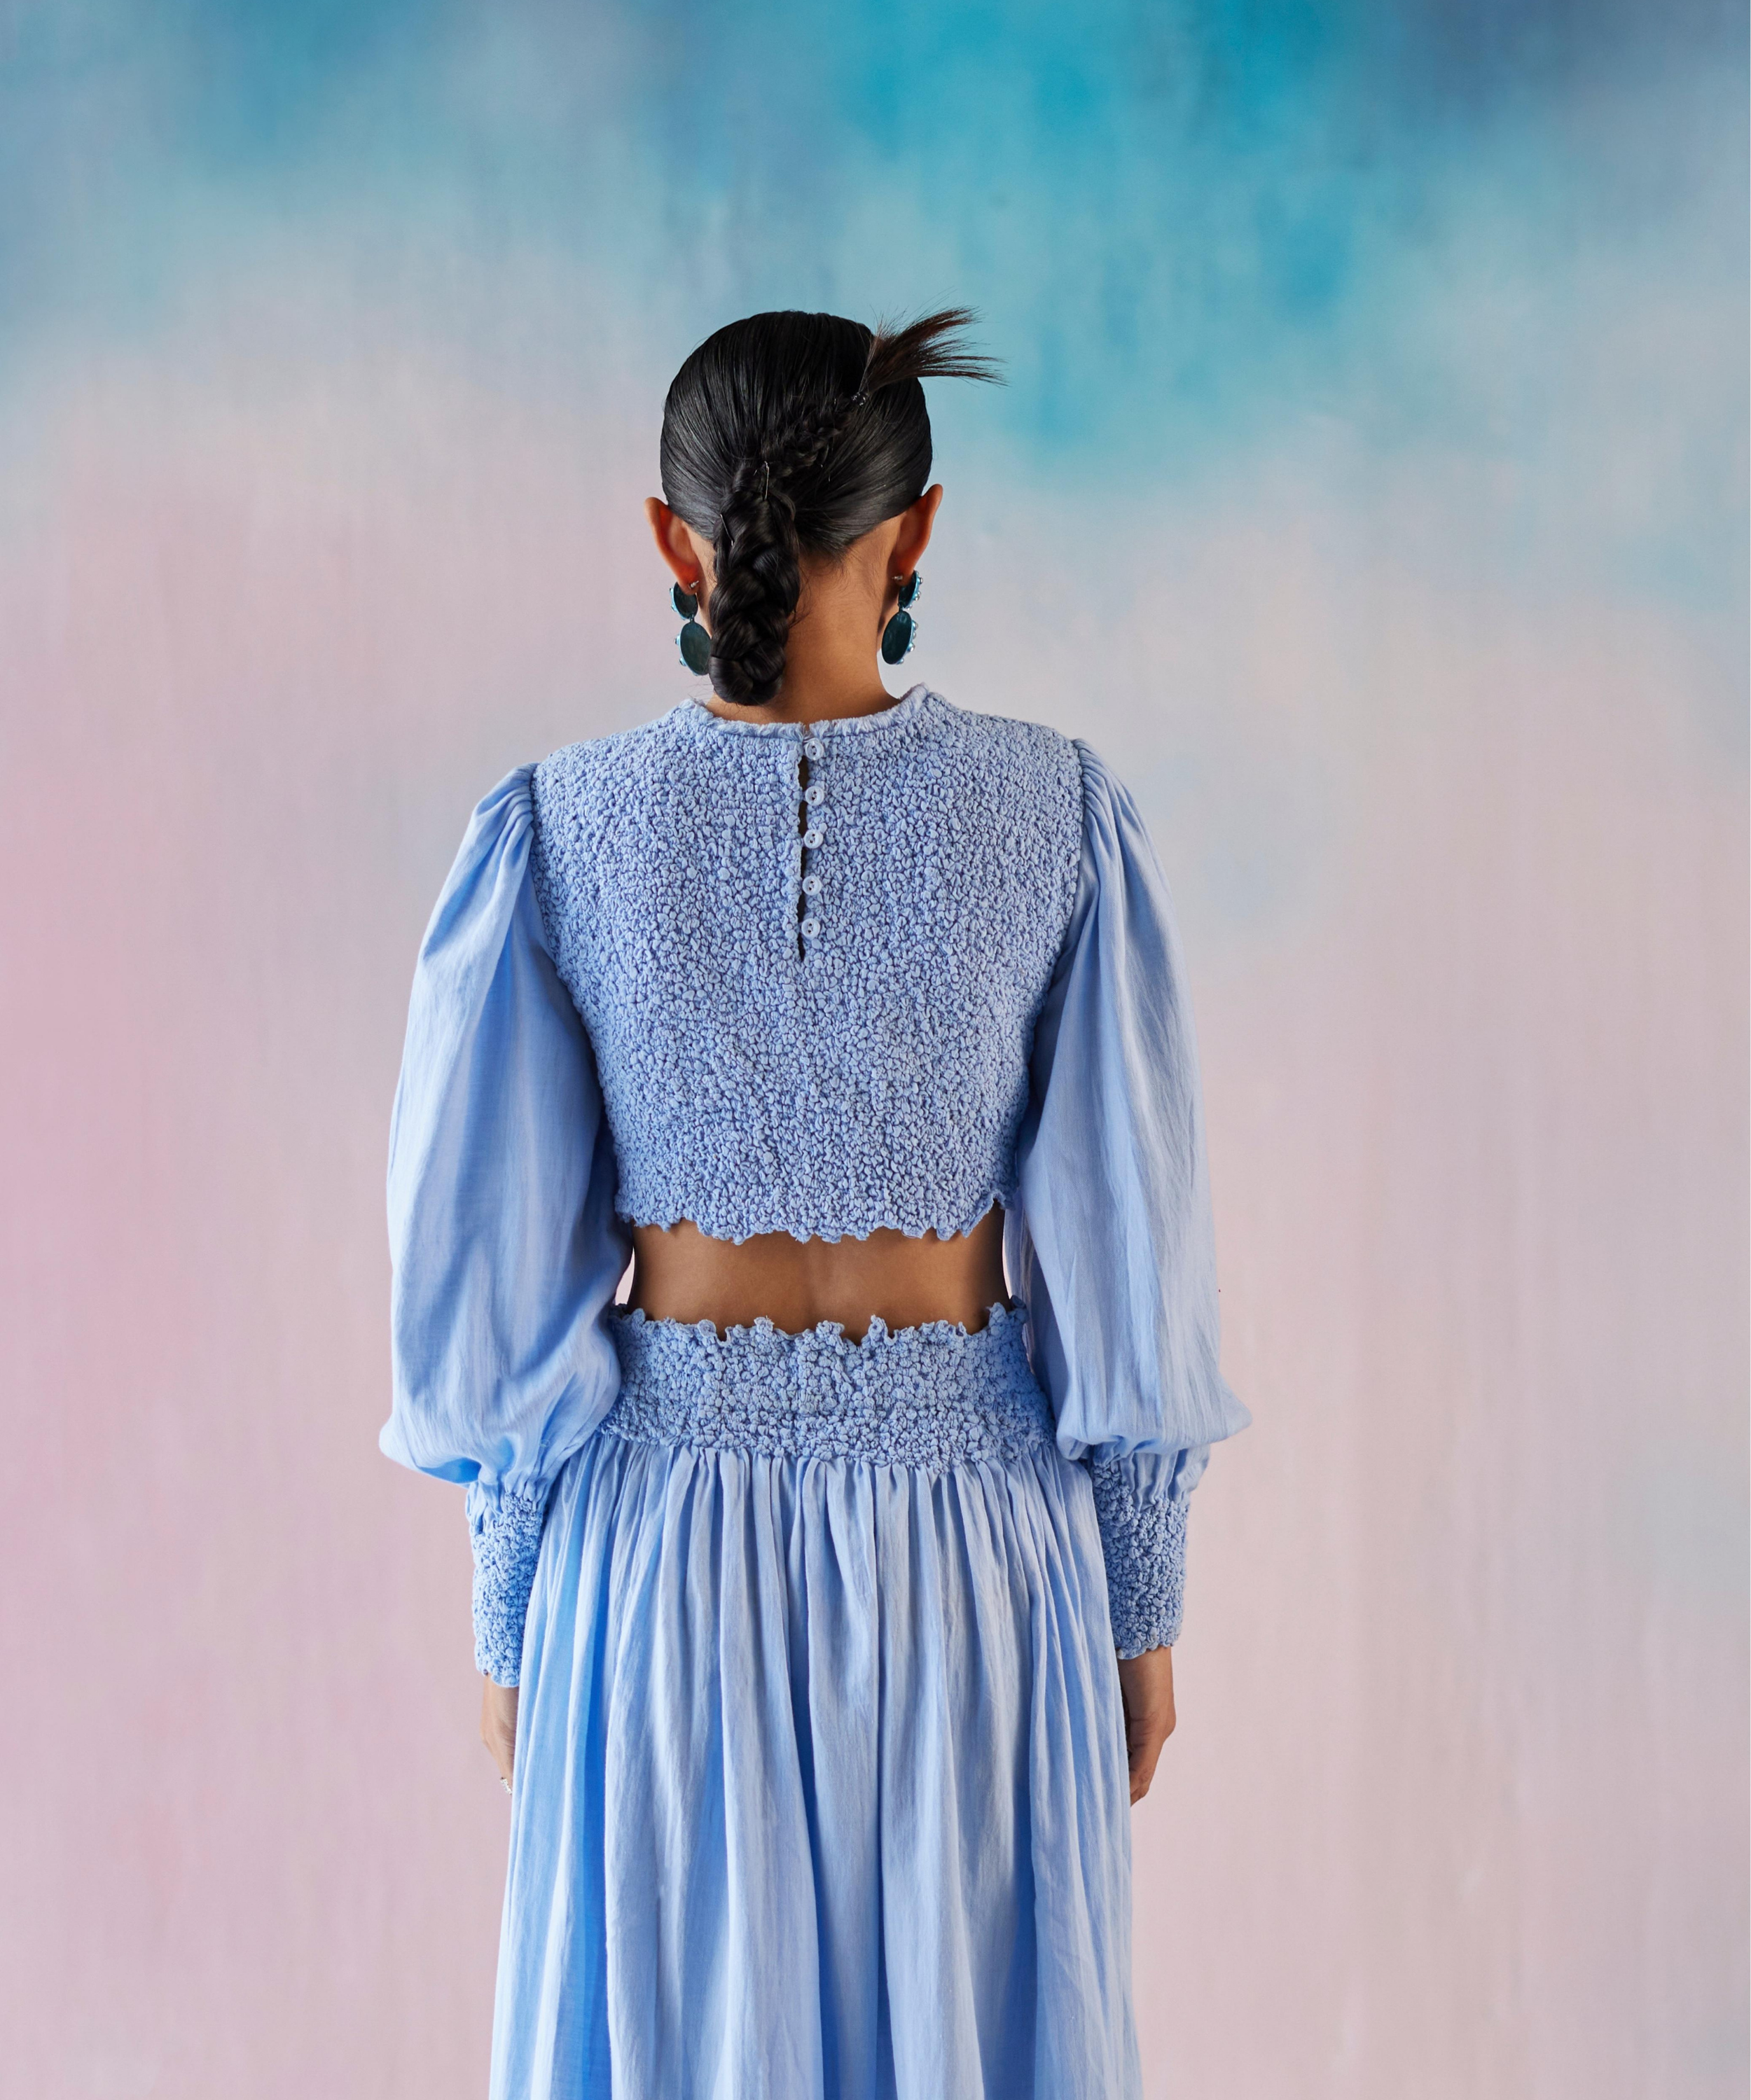 Boy Blue Smocked Crop Top With Leg-o-mutton Sleeves